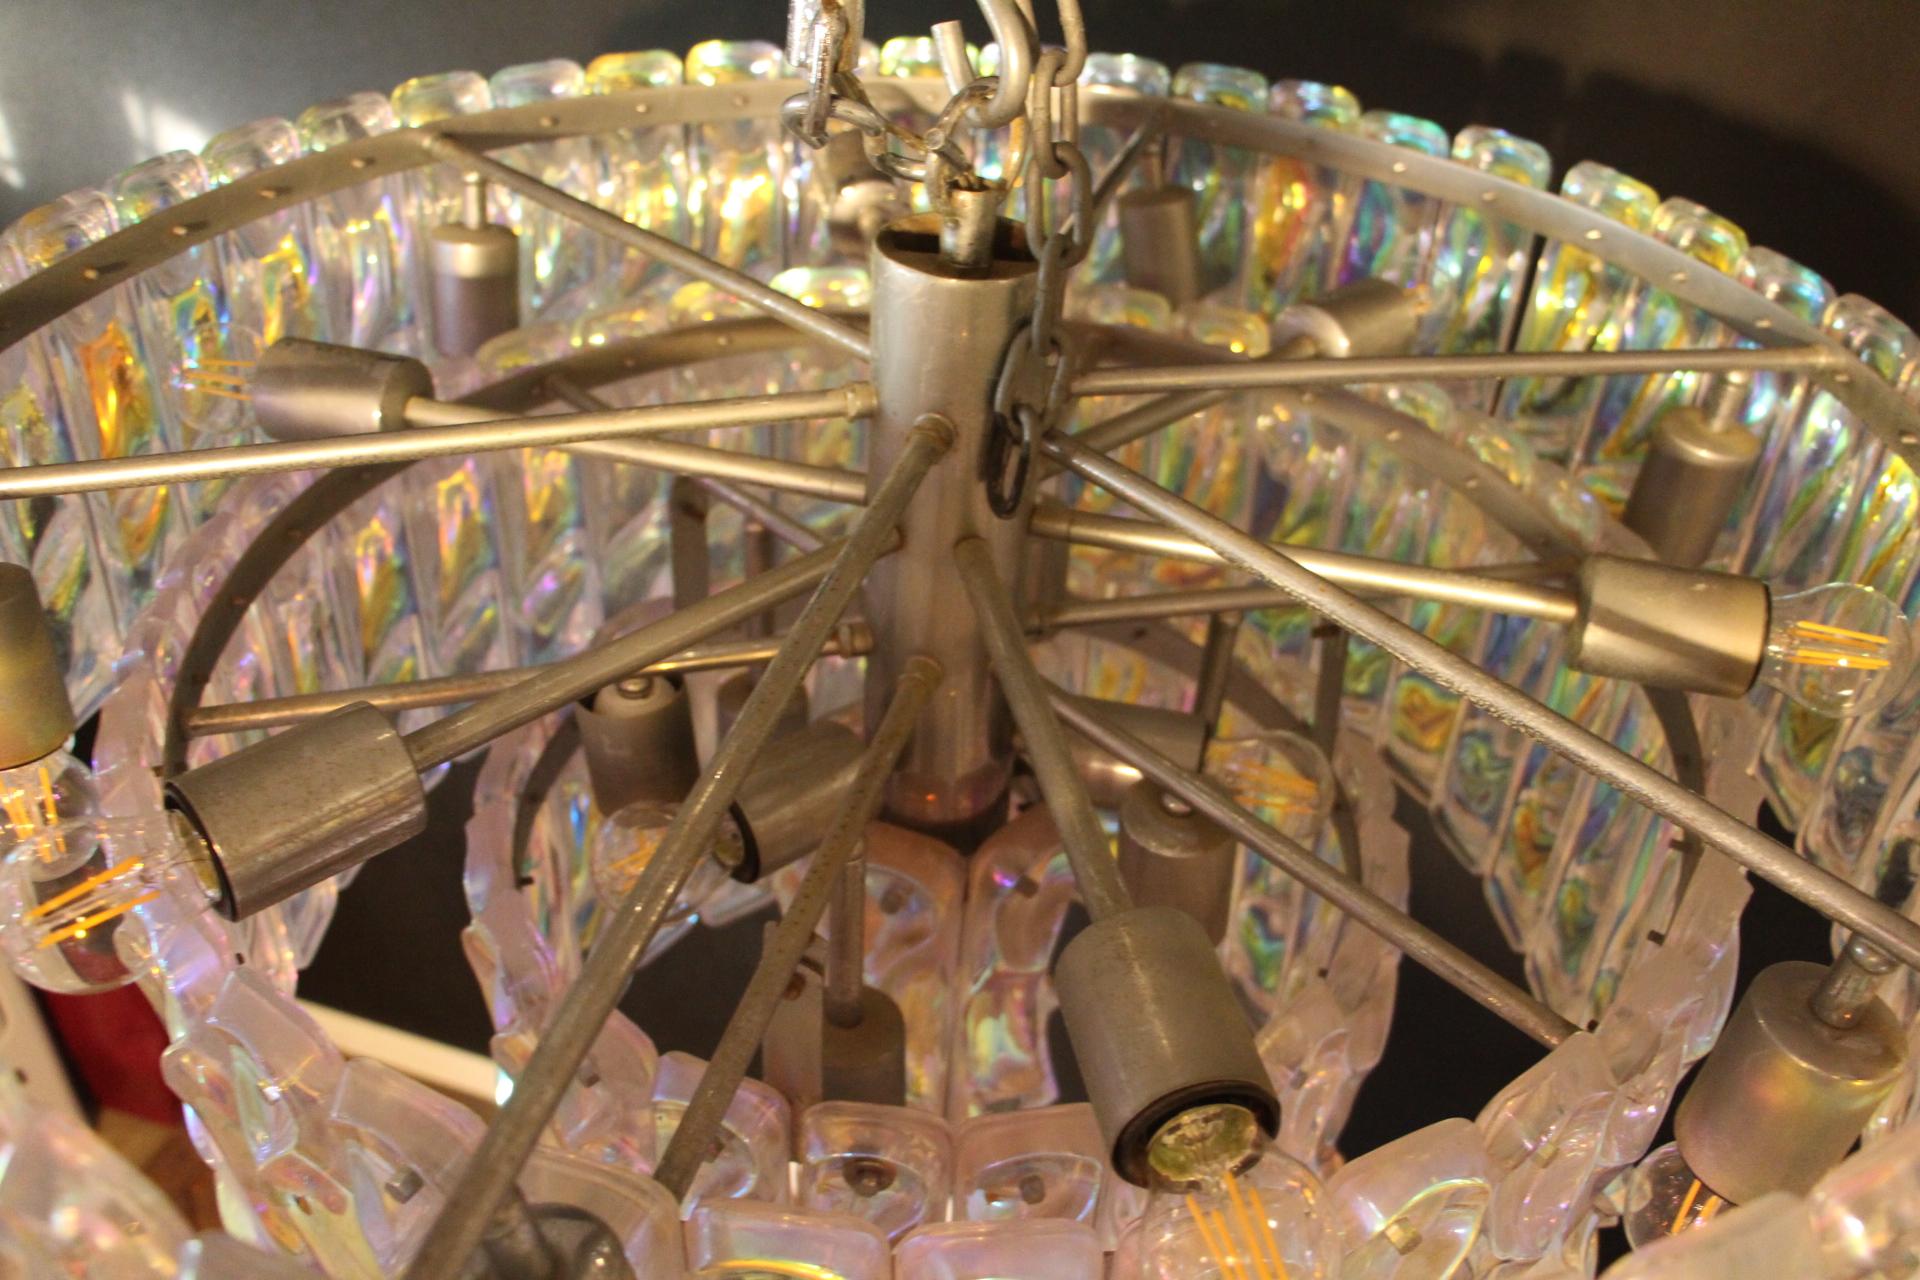 This fabulous chandelier is amazing.Indeed, its colors change according to light and surrounding.
Its Murano glass plaques change color from iridescent white to yellow,green,blue,pink and purple.
It features 4 tiers and is spectacular.
Its frame